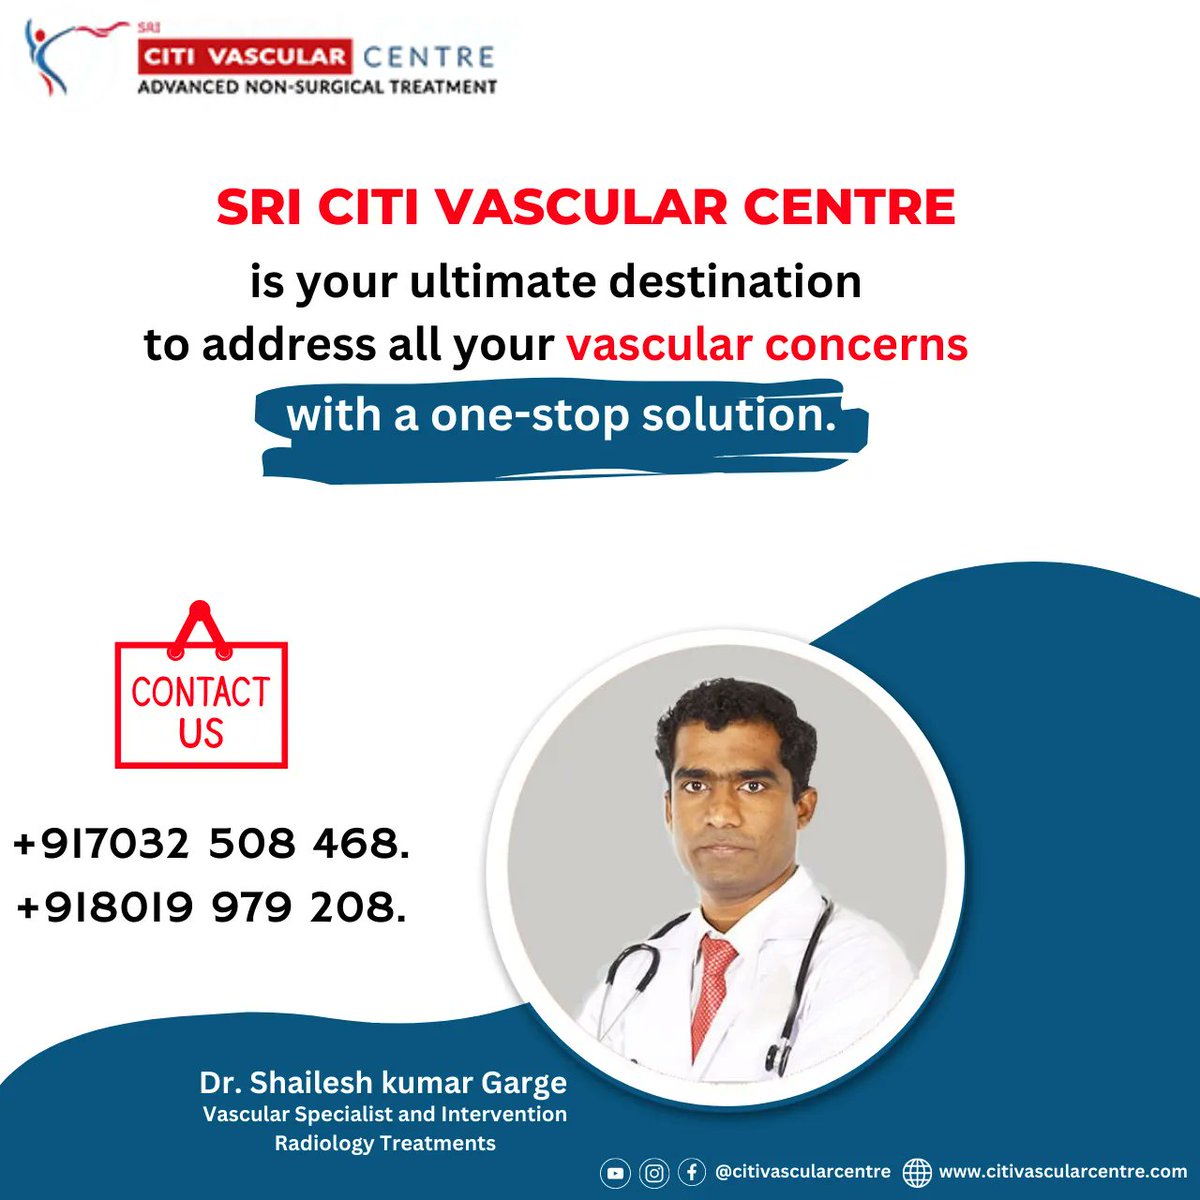 Are you looking for vascular treatment.

For More Details Call Or WhatsApp +91 70325 08468, +91 80199 79208  

#vascularhealth #vascularsurgery #vascularmedicine #veins #arteries #bloodflow #bloodvessels #cardiovascularhealth #heartdisease